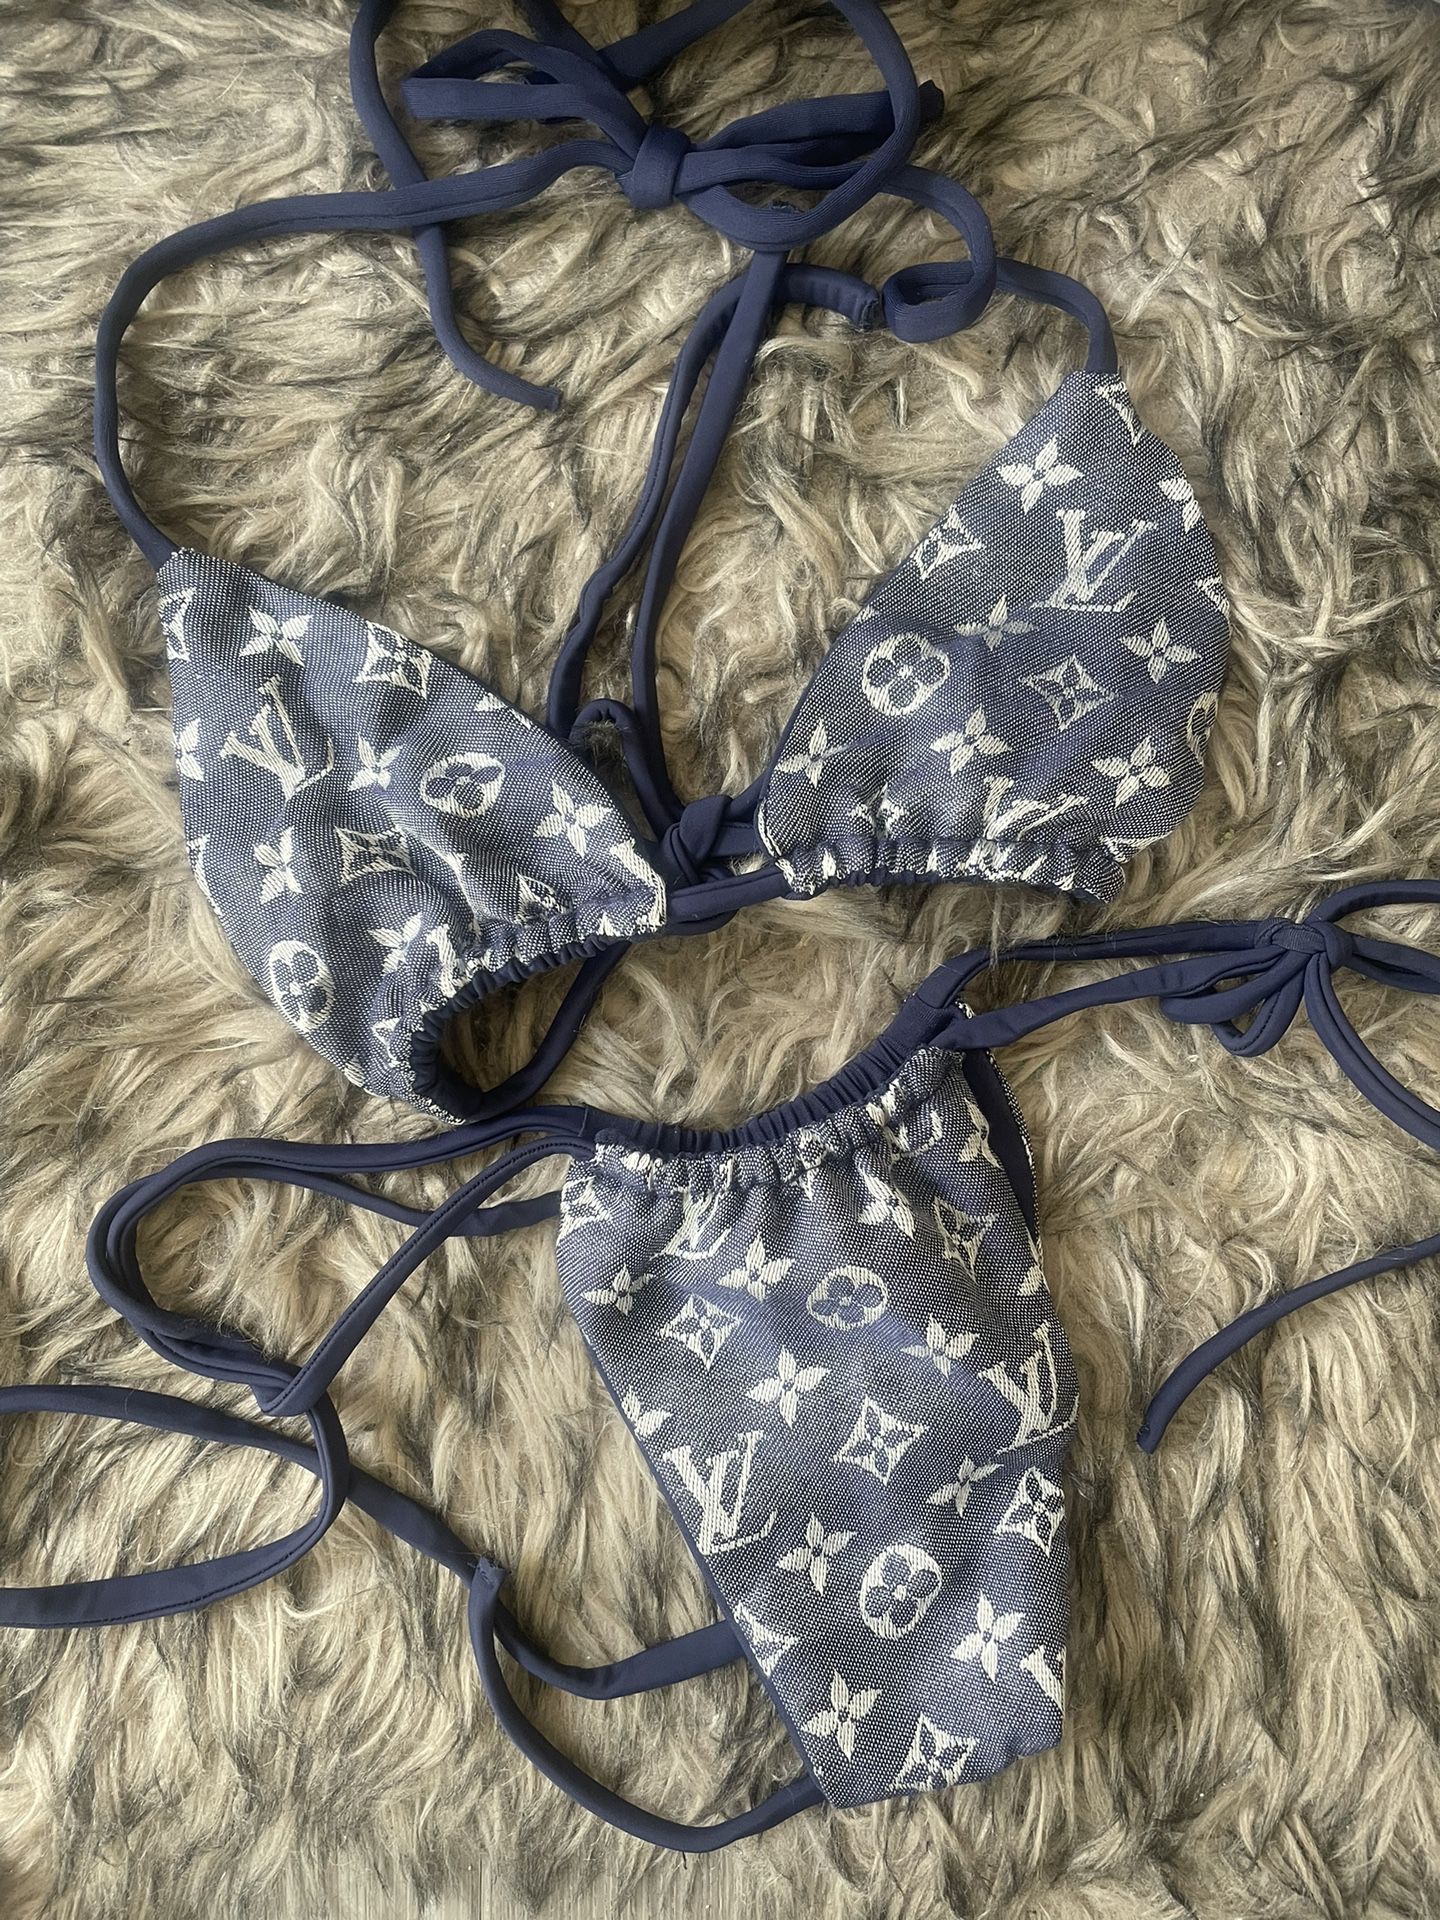 Custom LV Bathing Suits Made From Scarf for Sale in West